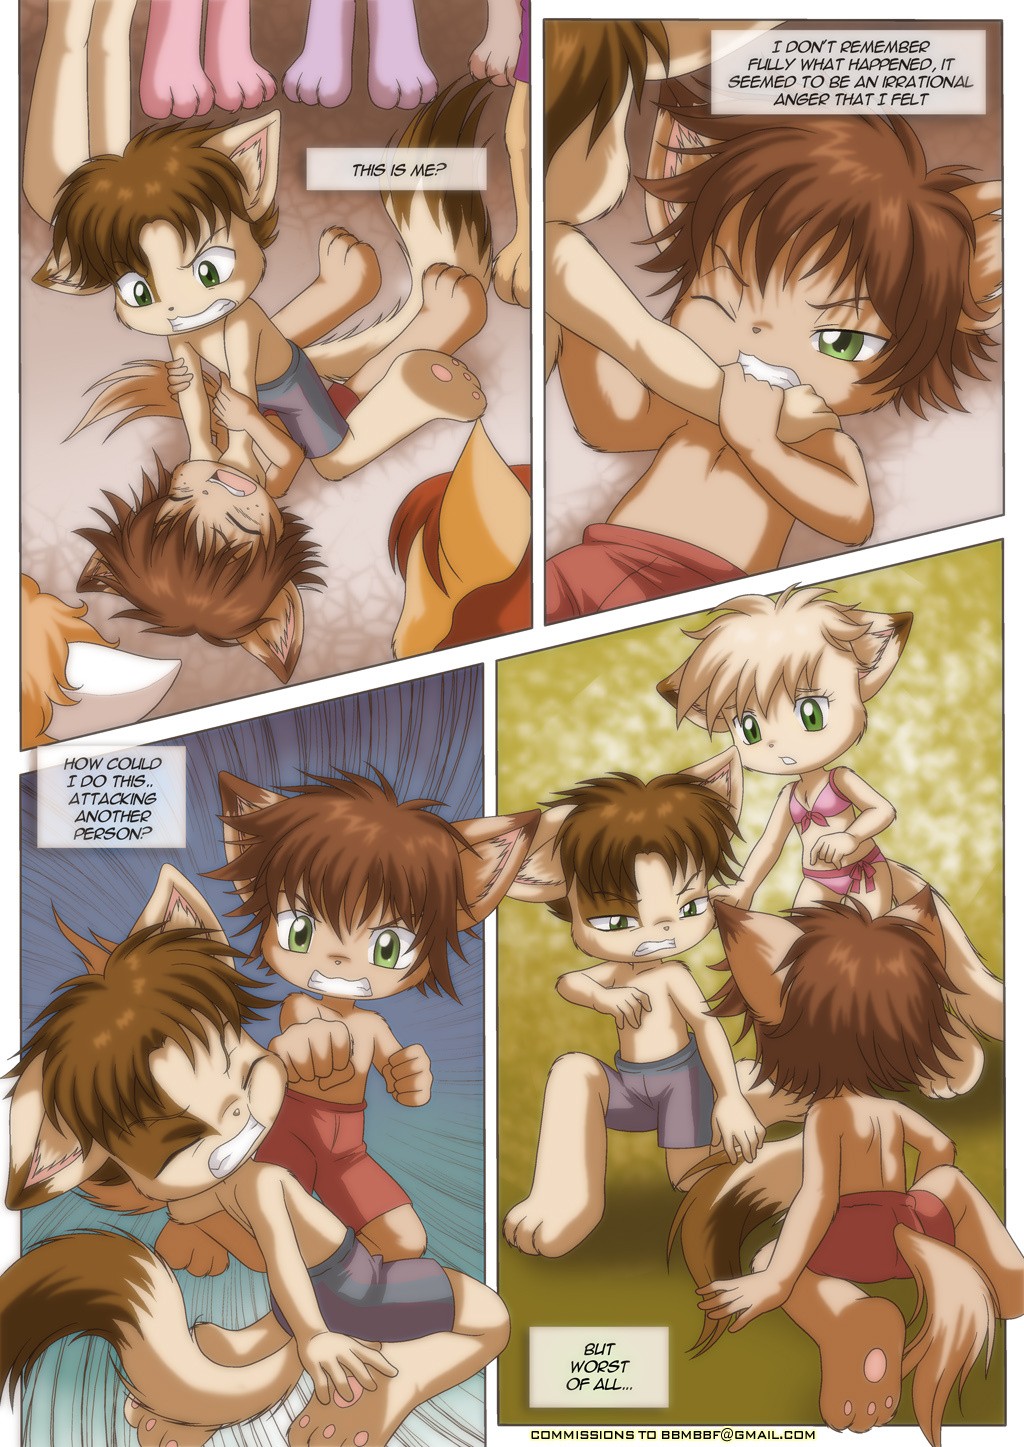 Little Tails 6: Missing The Light of The Day porn comic picture 3